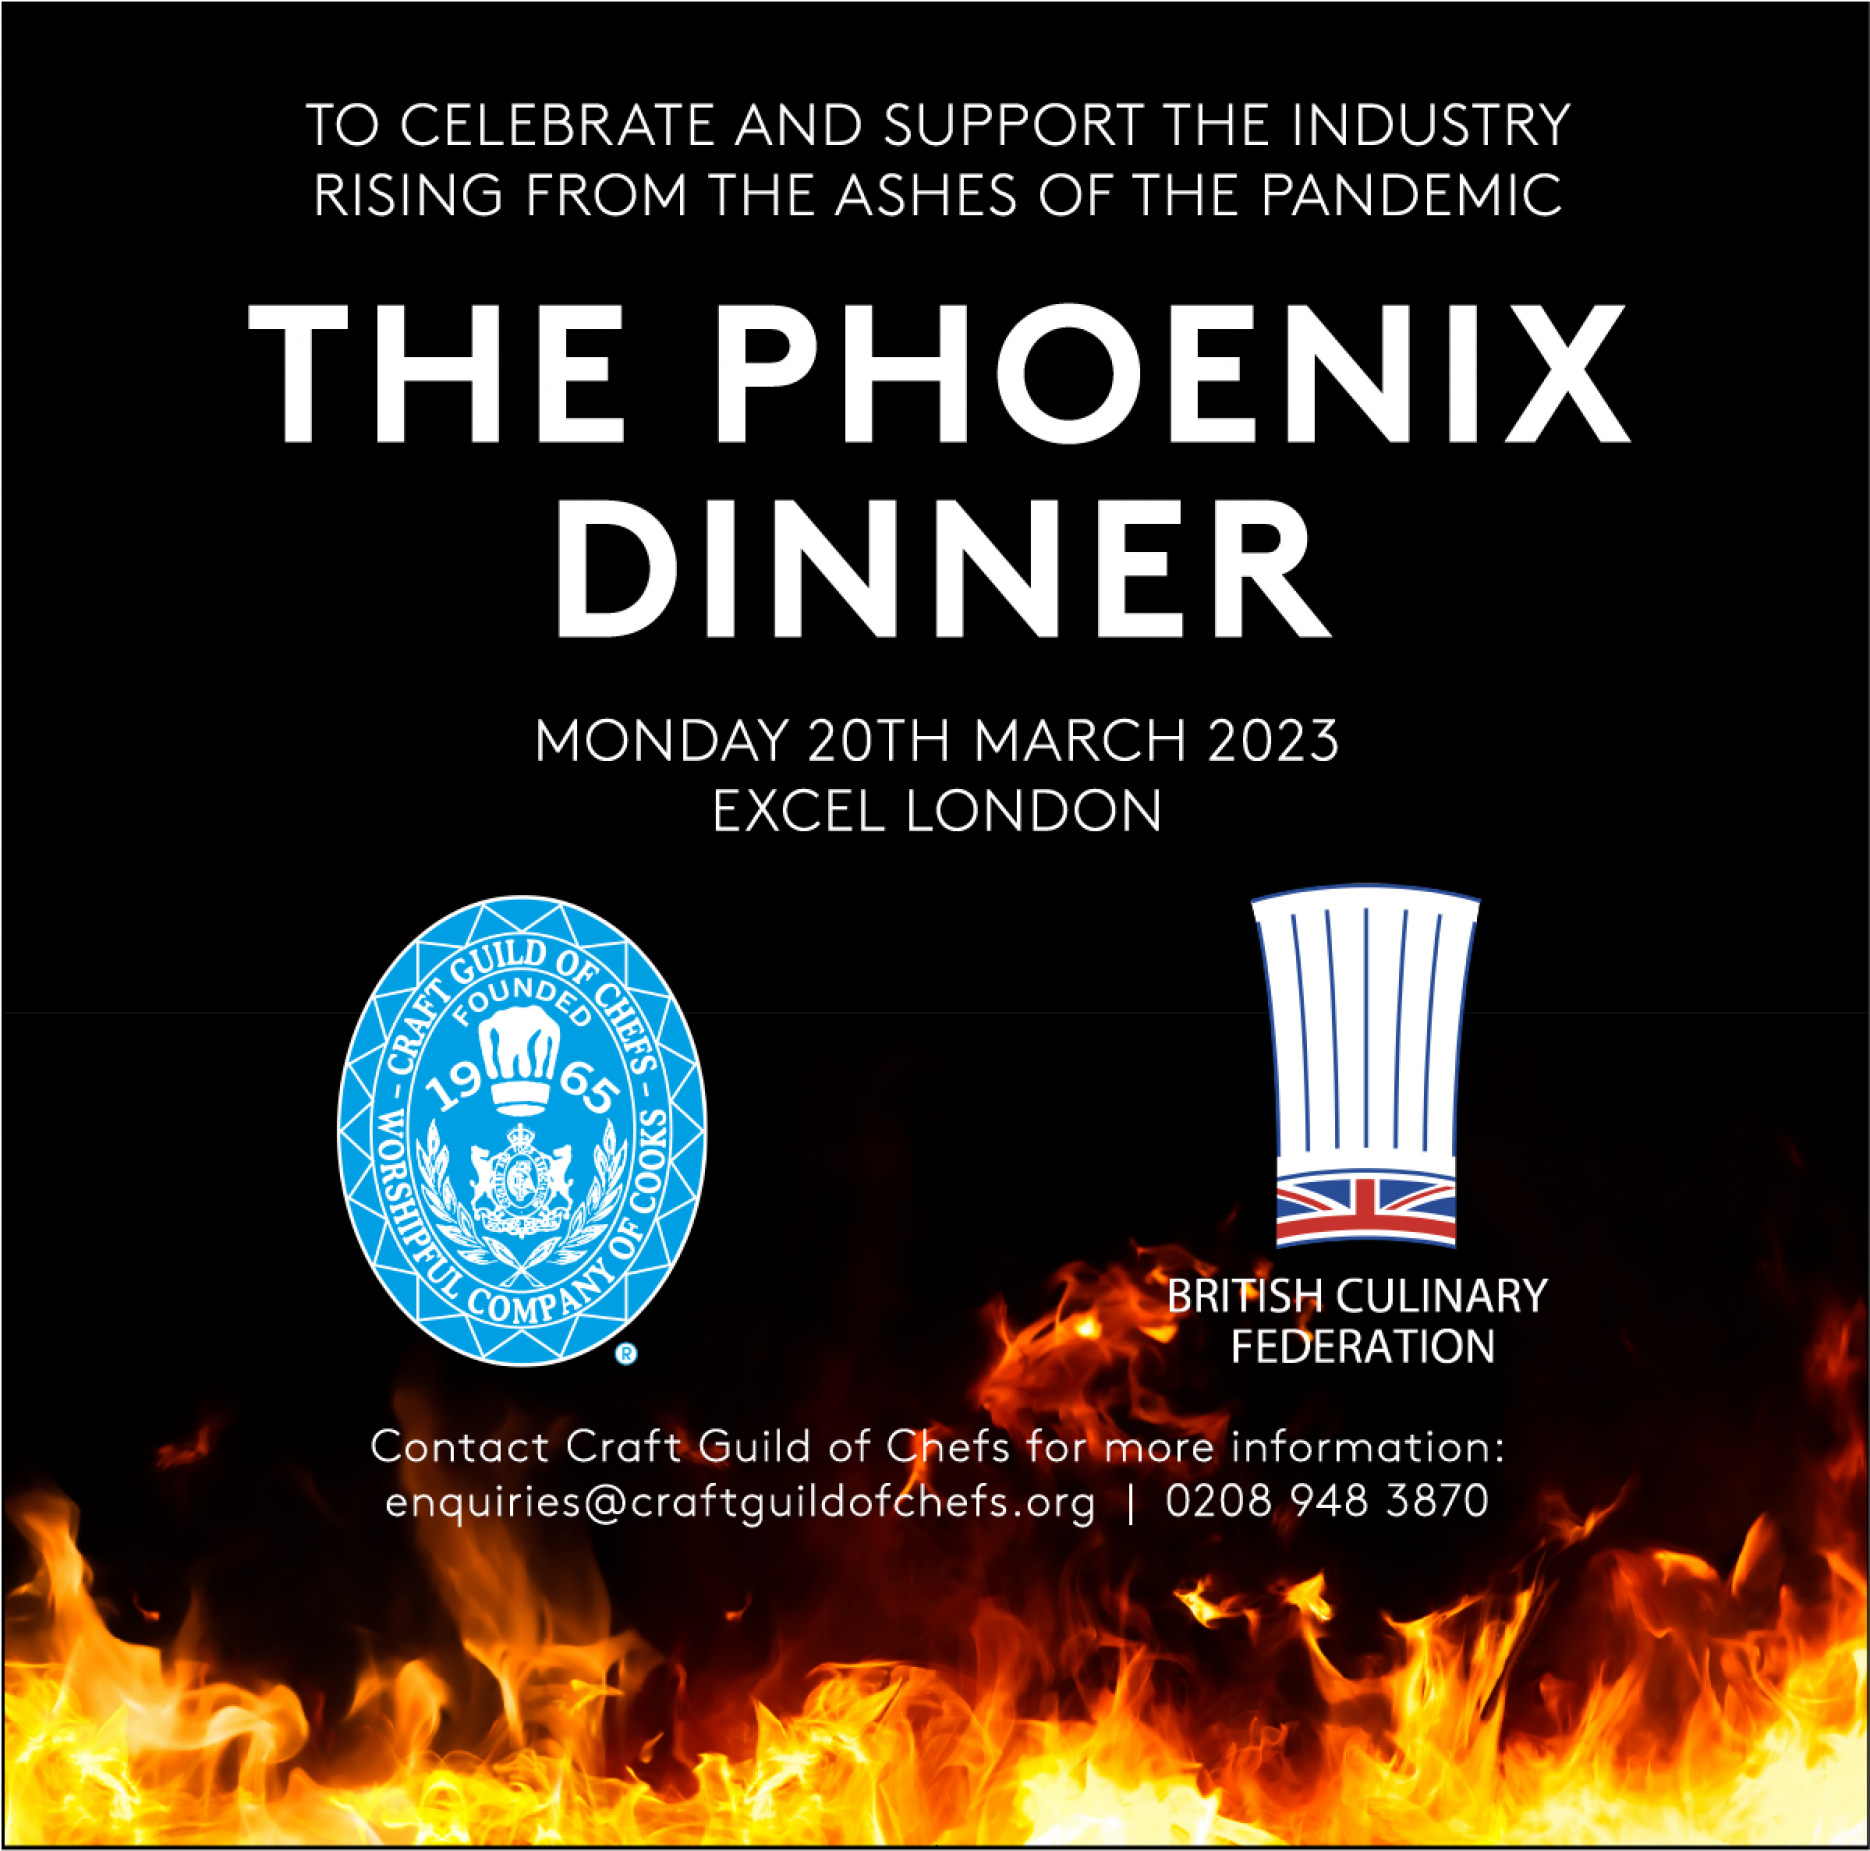 Craft Guild of Chefs and British Culinary Federation to run Phoenix